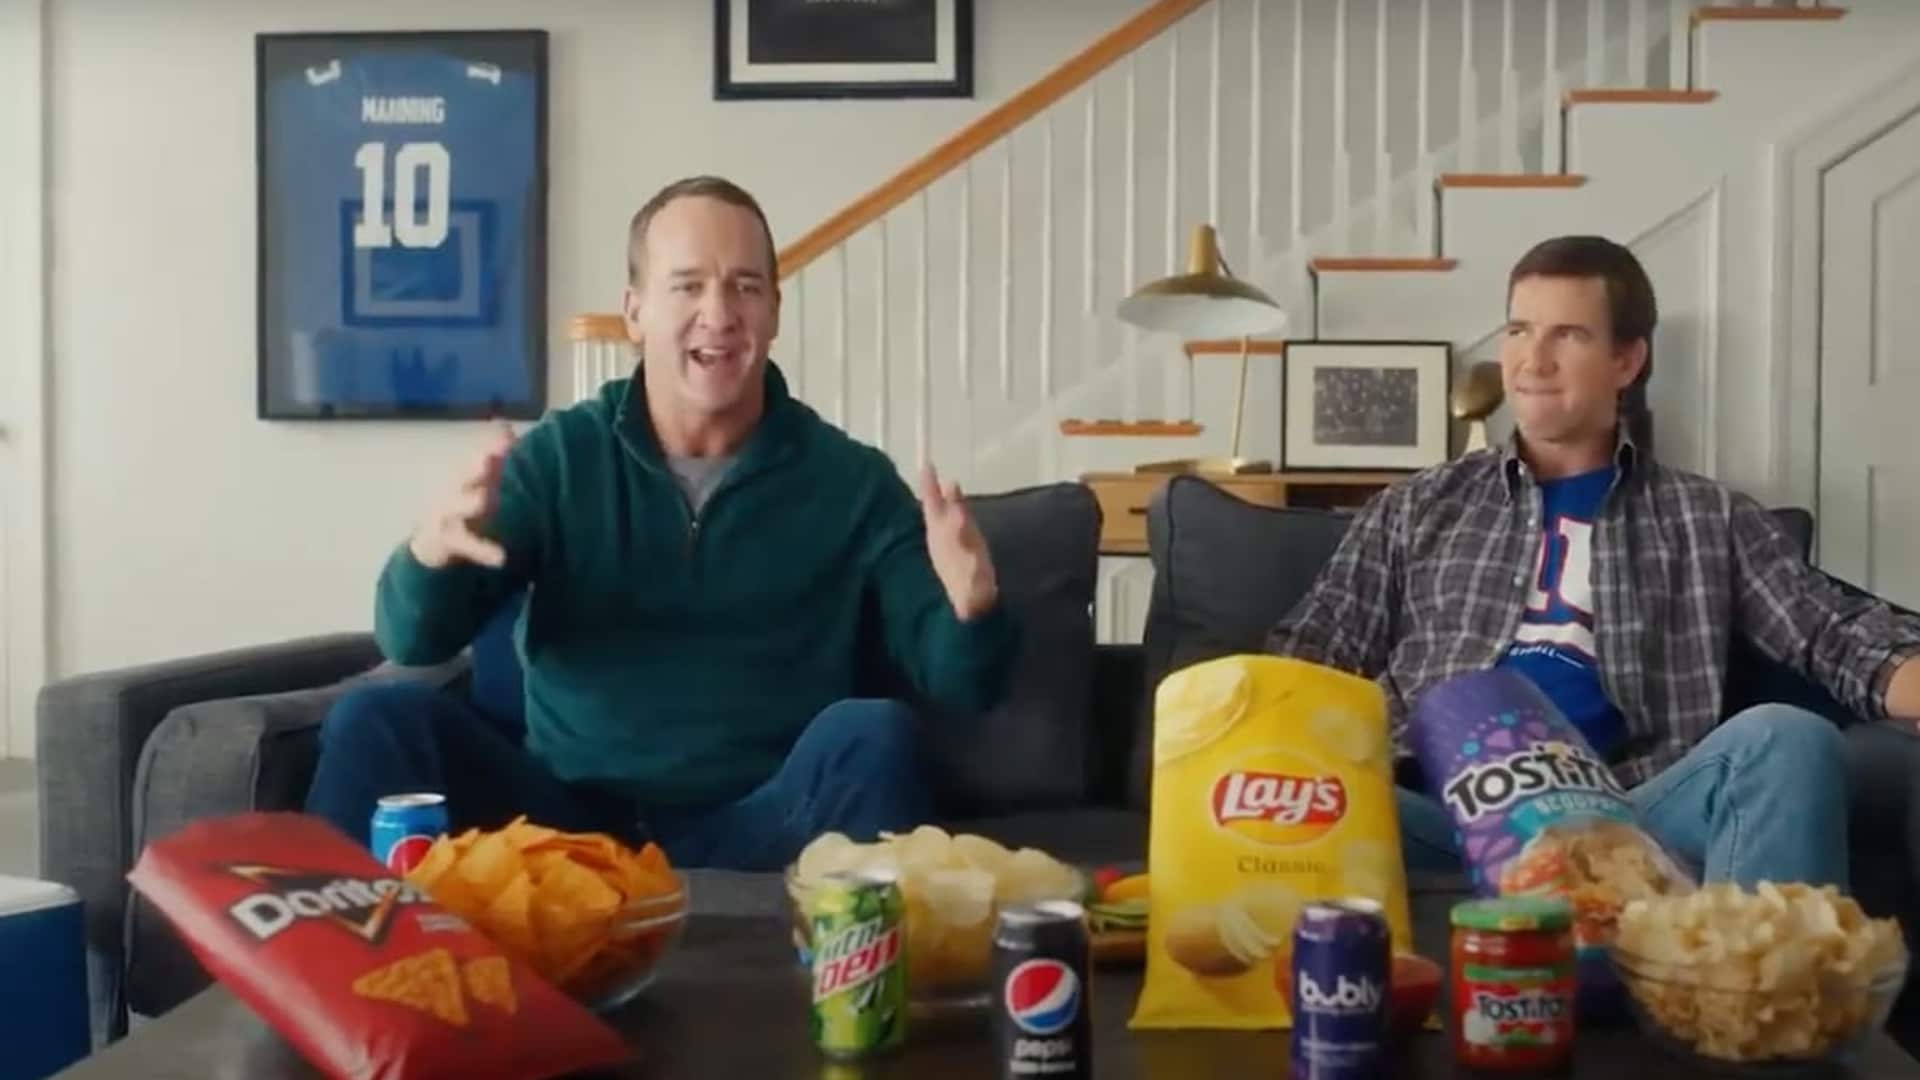 2023 Super Bowl Commercials: Find here a lineup with some of the ads